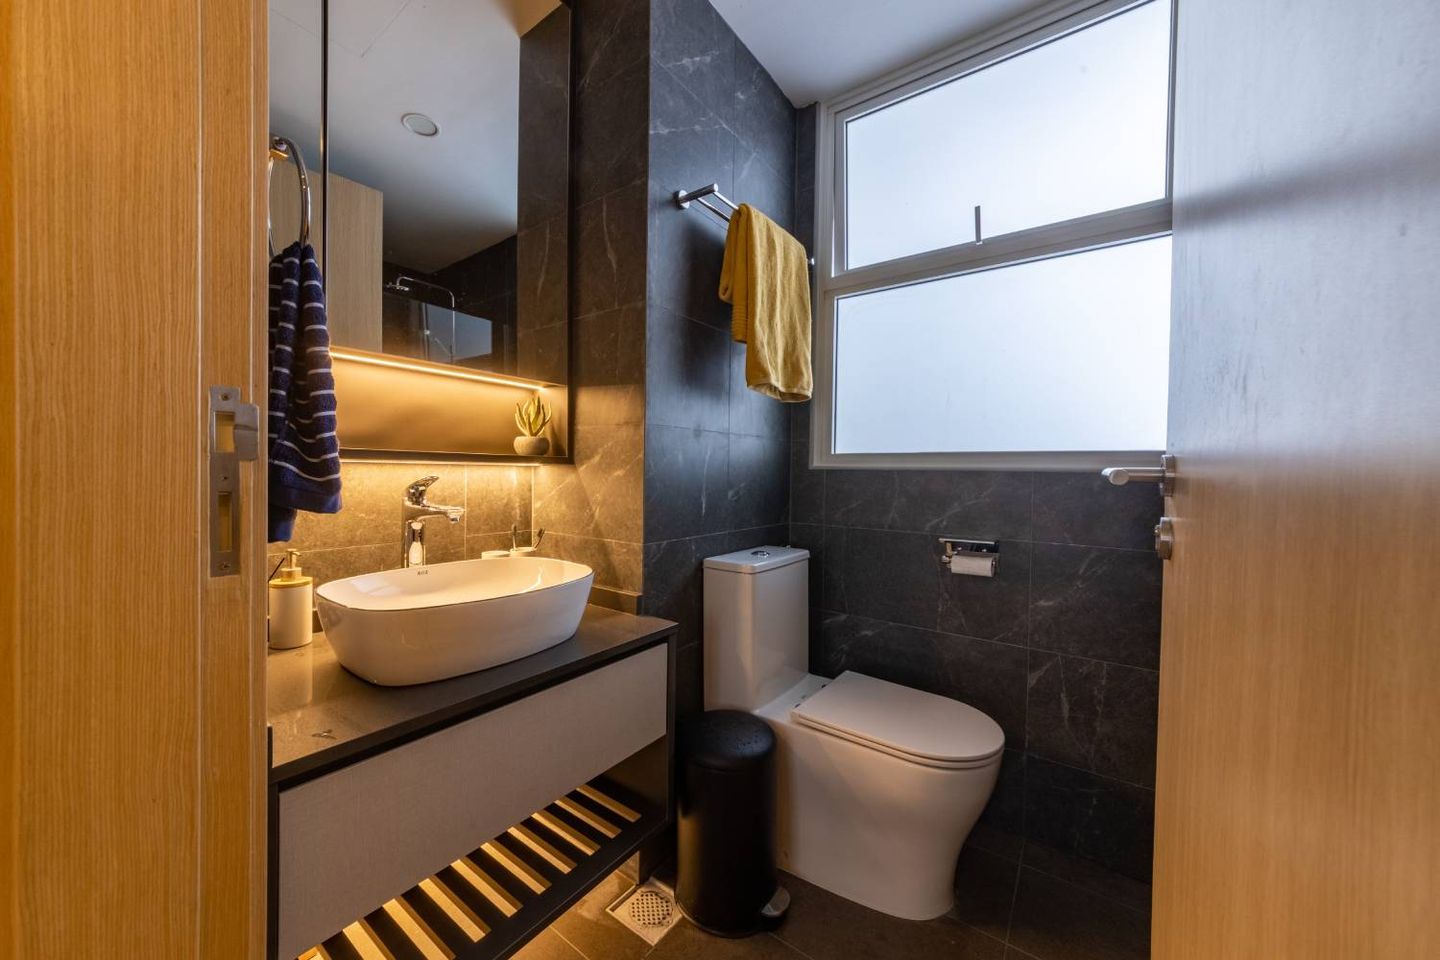 Contemporary Black Tiled Bathroom with White WC, Wall-Mounted Unit, and LED Lighting - Livspace